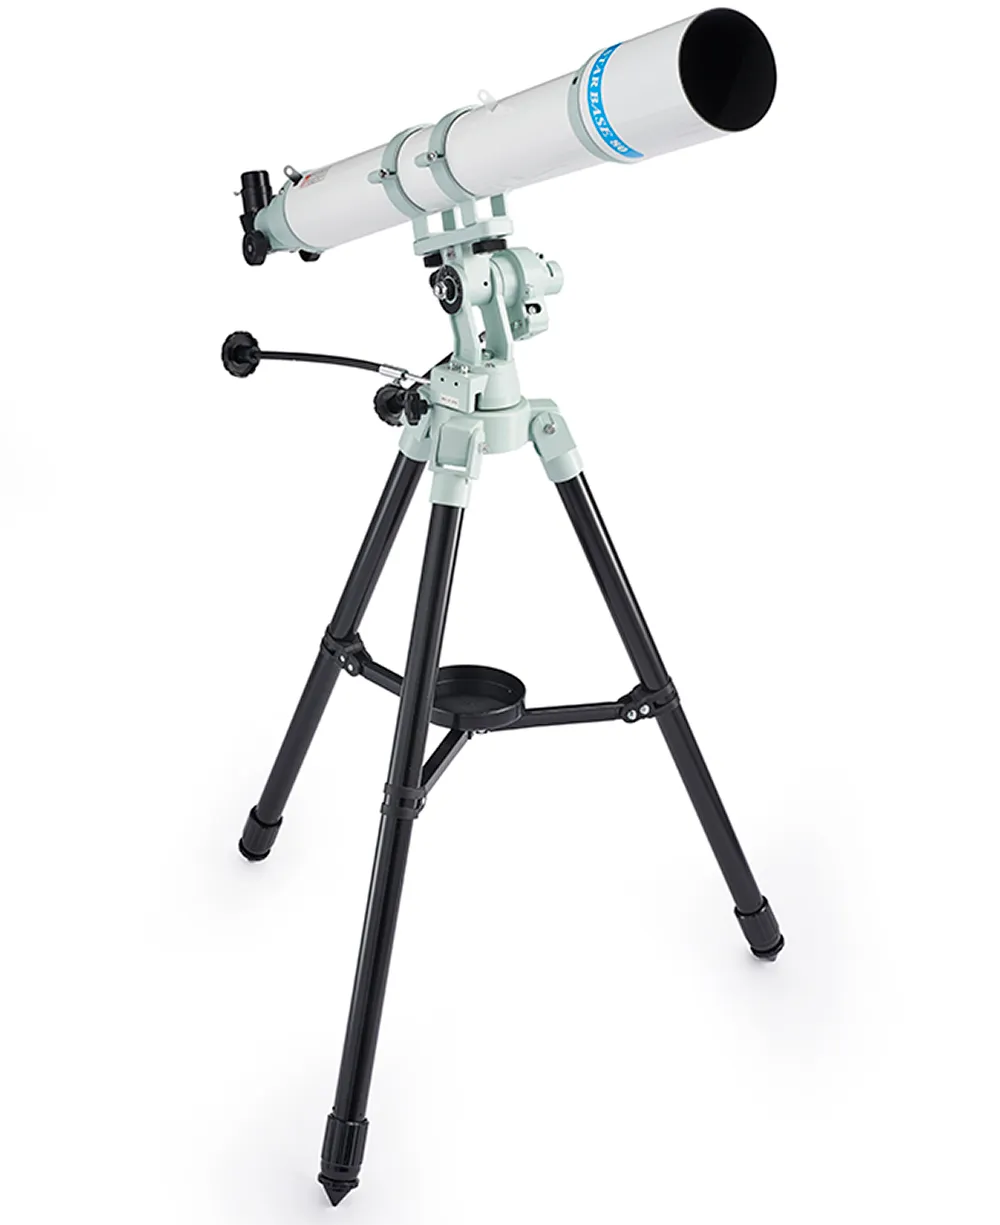 When testing the best telescopes for beginners, we examin the focuser, eyepieces, mount, optics and tripod.